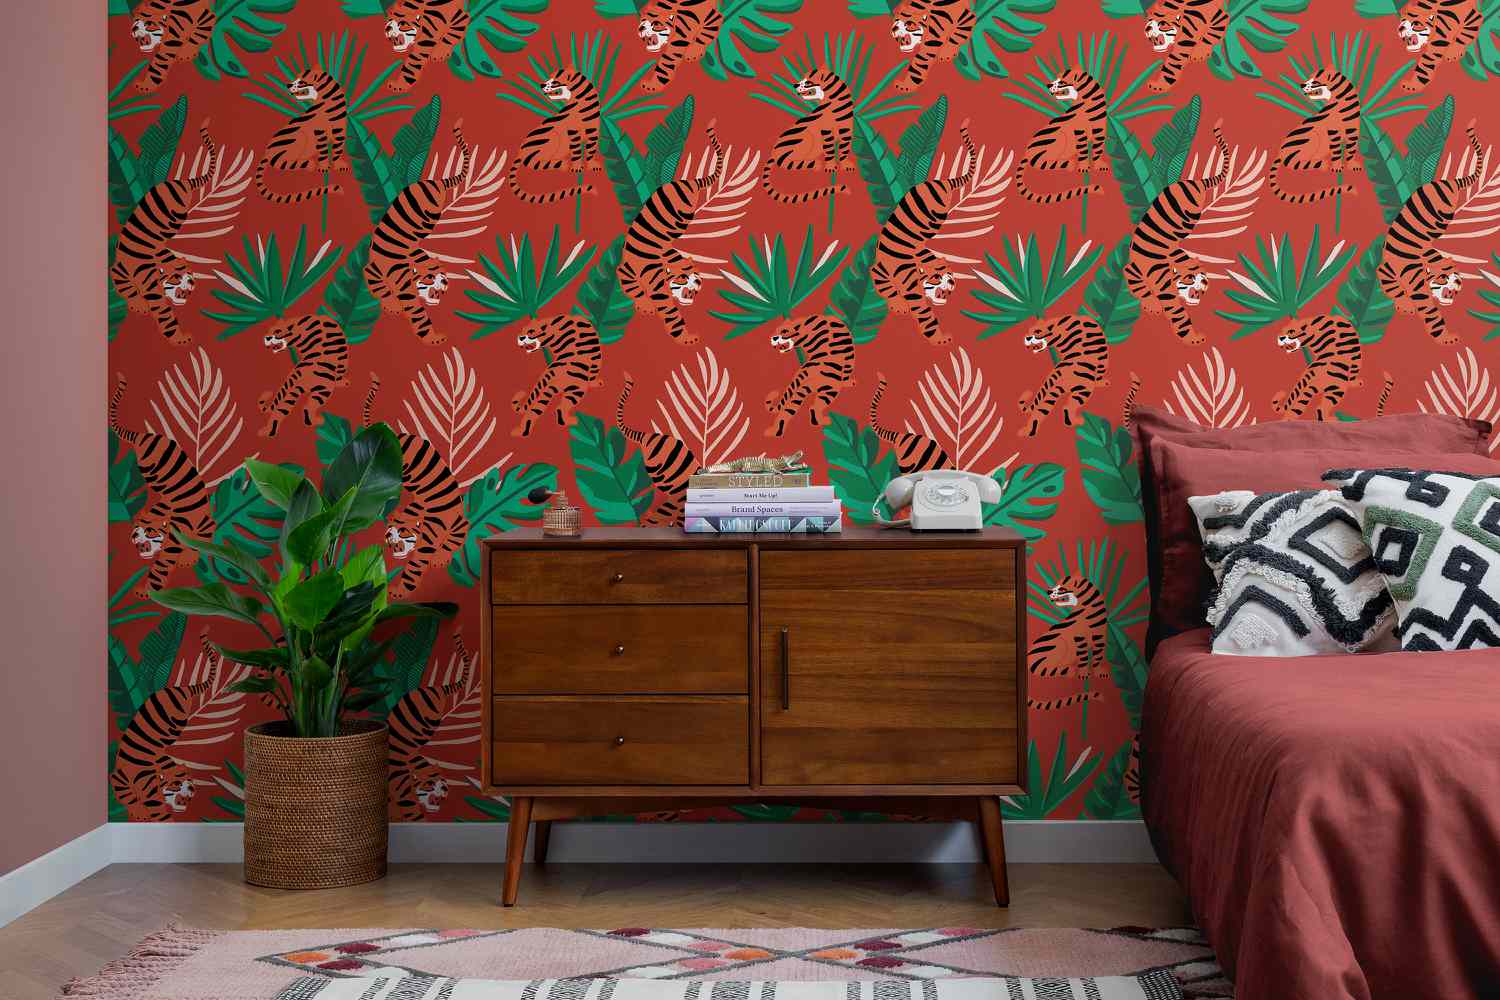 Wild Tiger Big Cat Tropical Leaves Wallpaper Mural inspired by Wes Anderson movies.